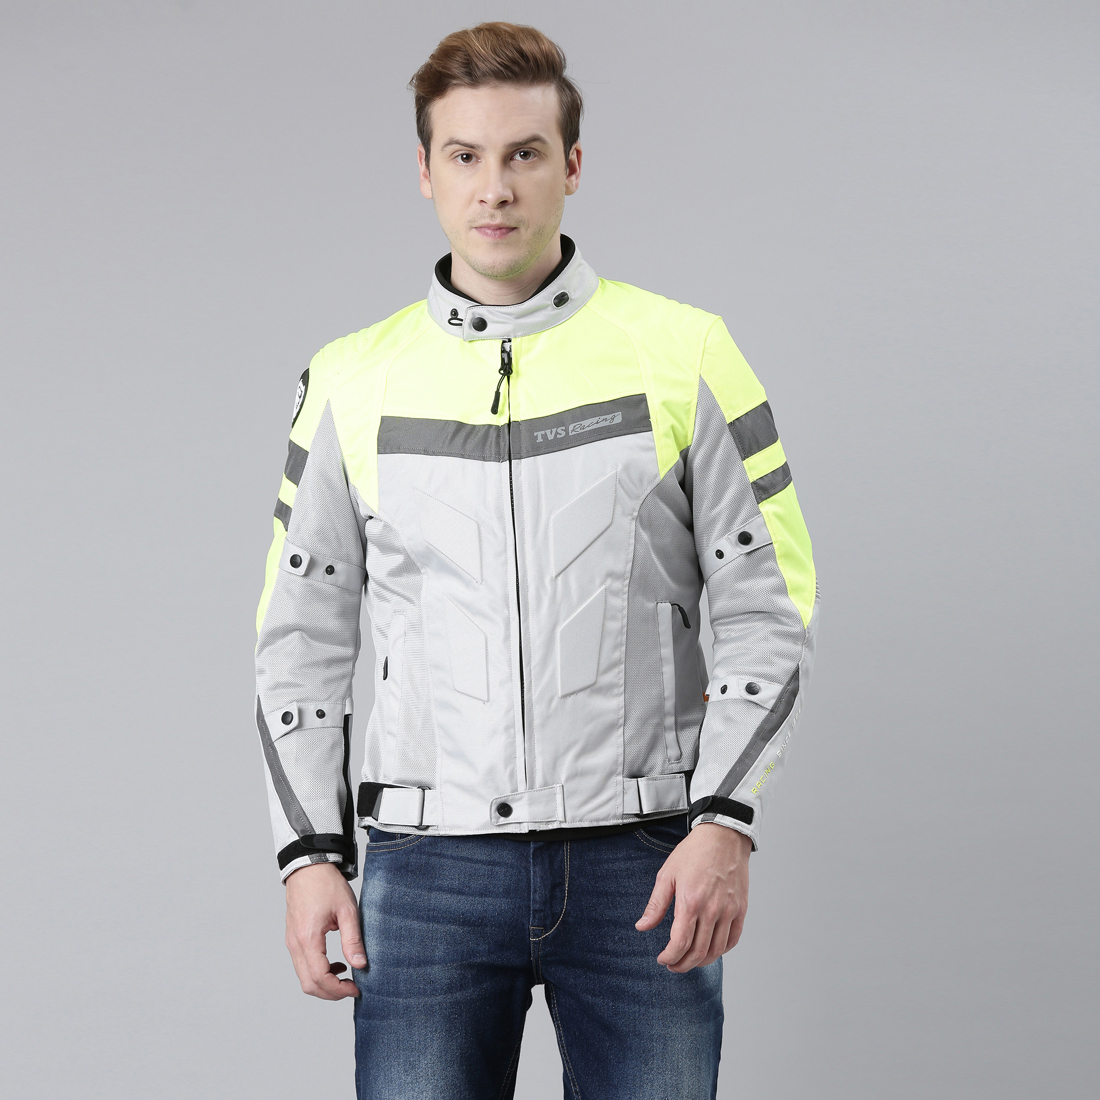  TVS Racing Aegis 3-Layer Riding Jacket for Men- All Weather Adaptability, CE Level 2 Armour Protection – Premium Bike Jackets for Bikers (Neon)